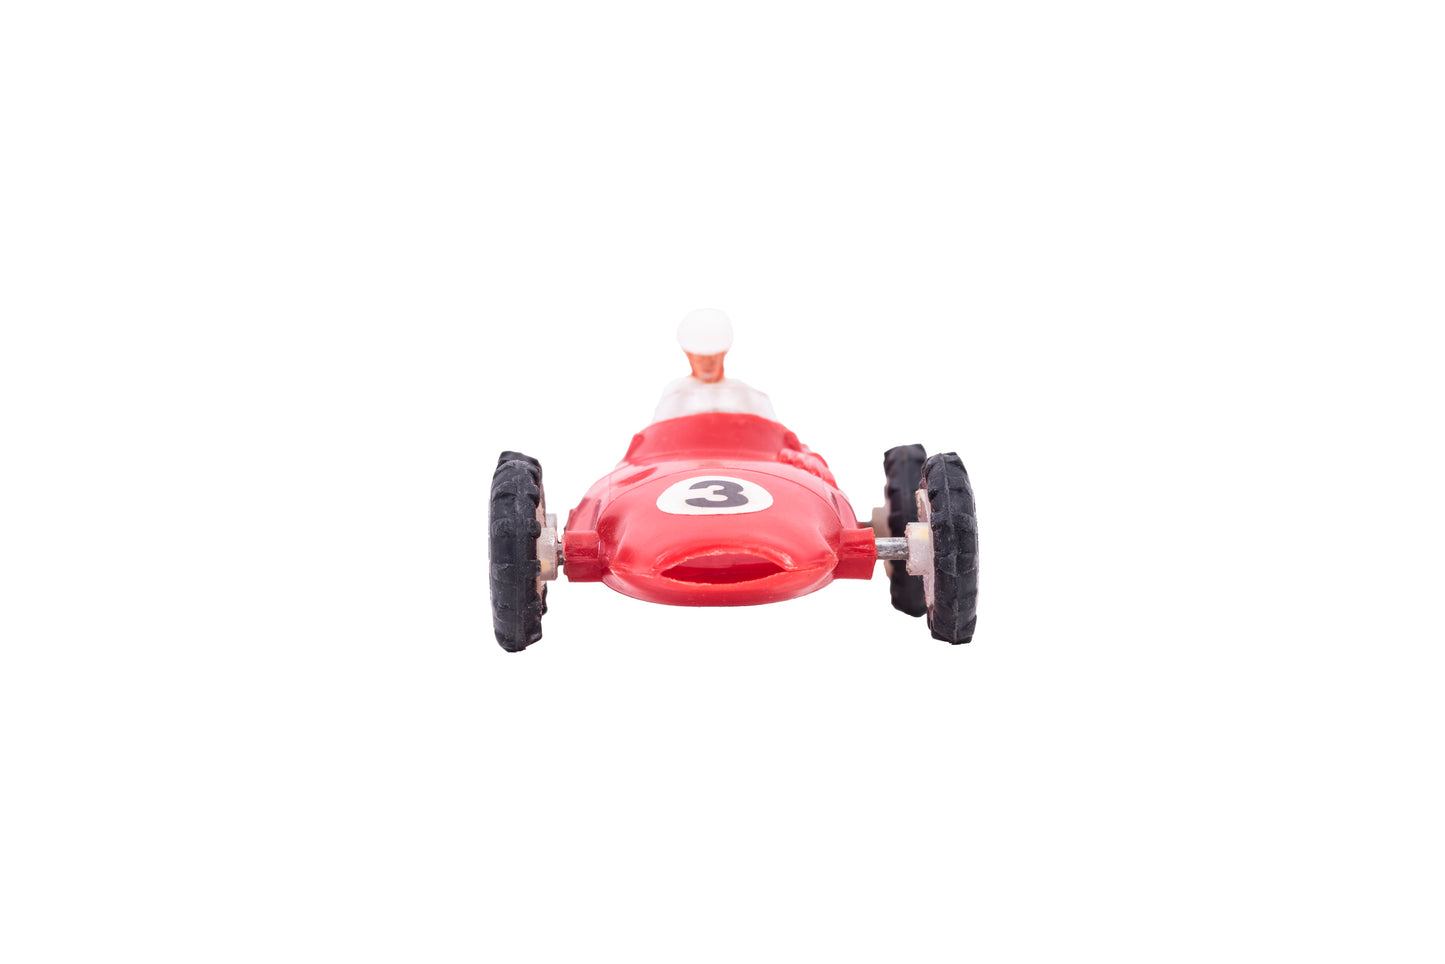 Vanwall Friction Racer Toy from Marx